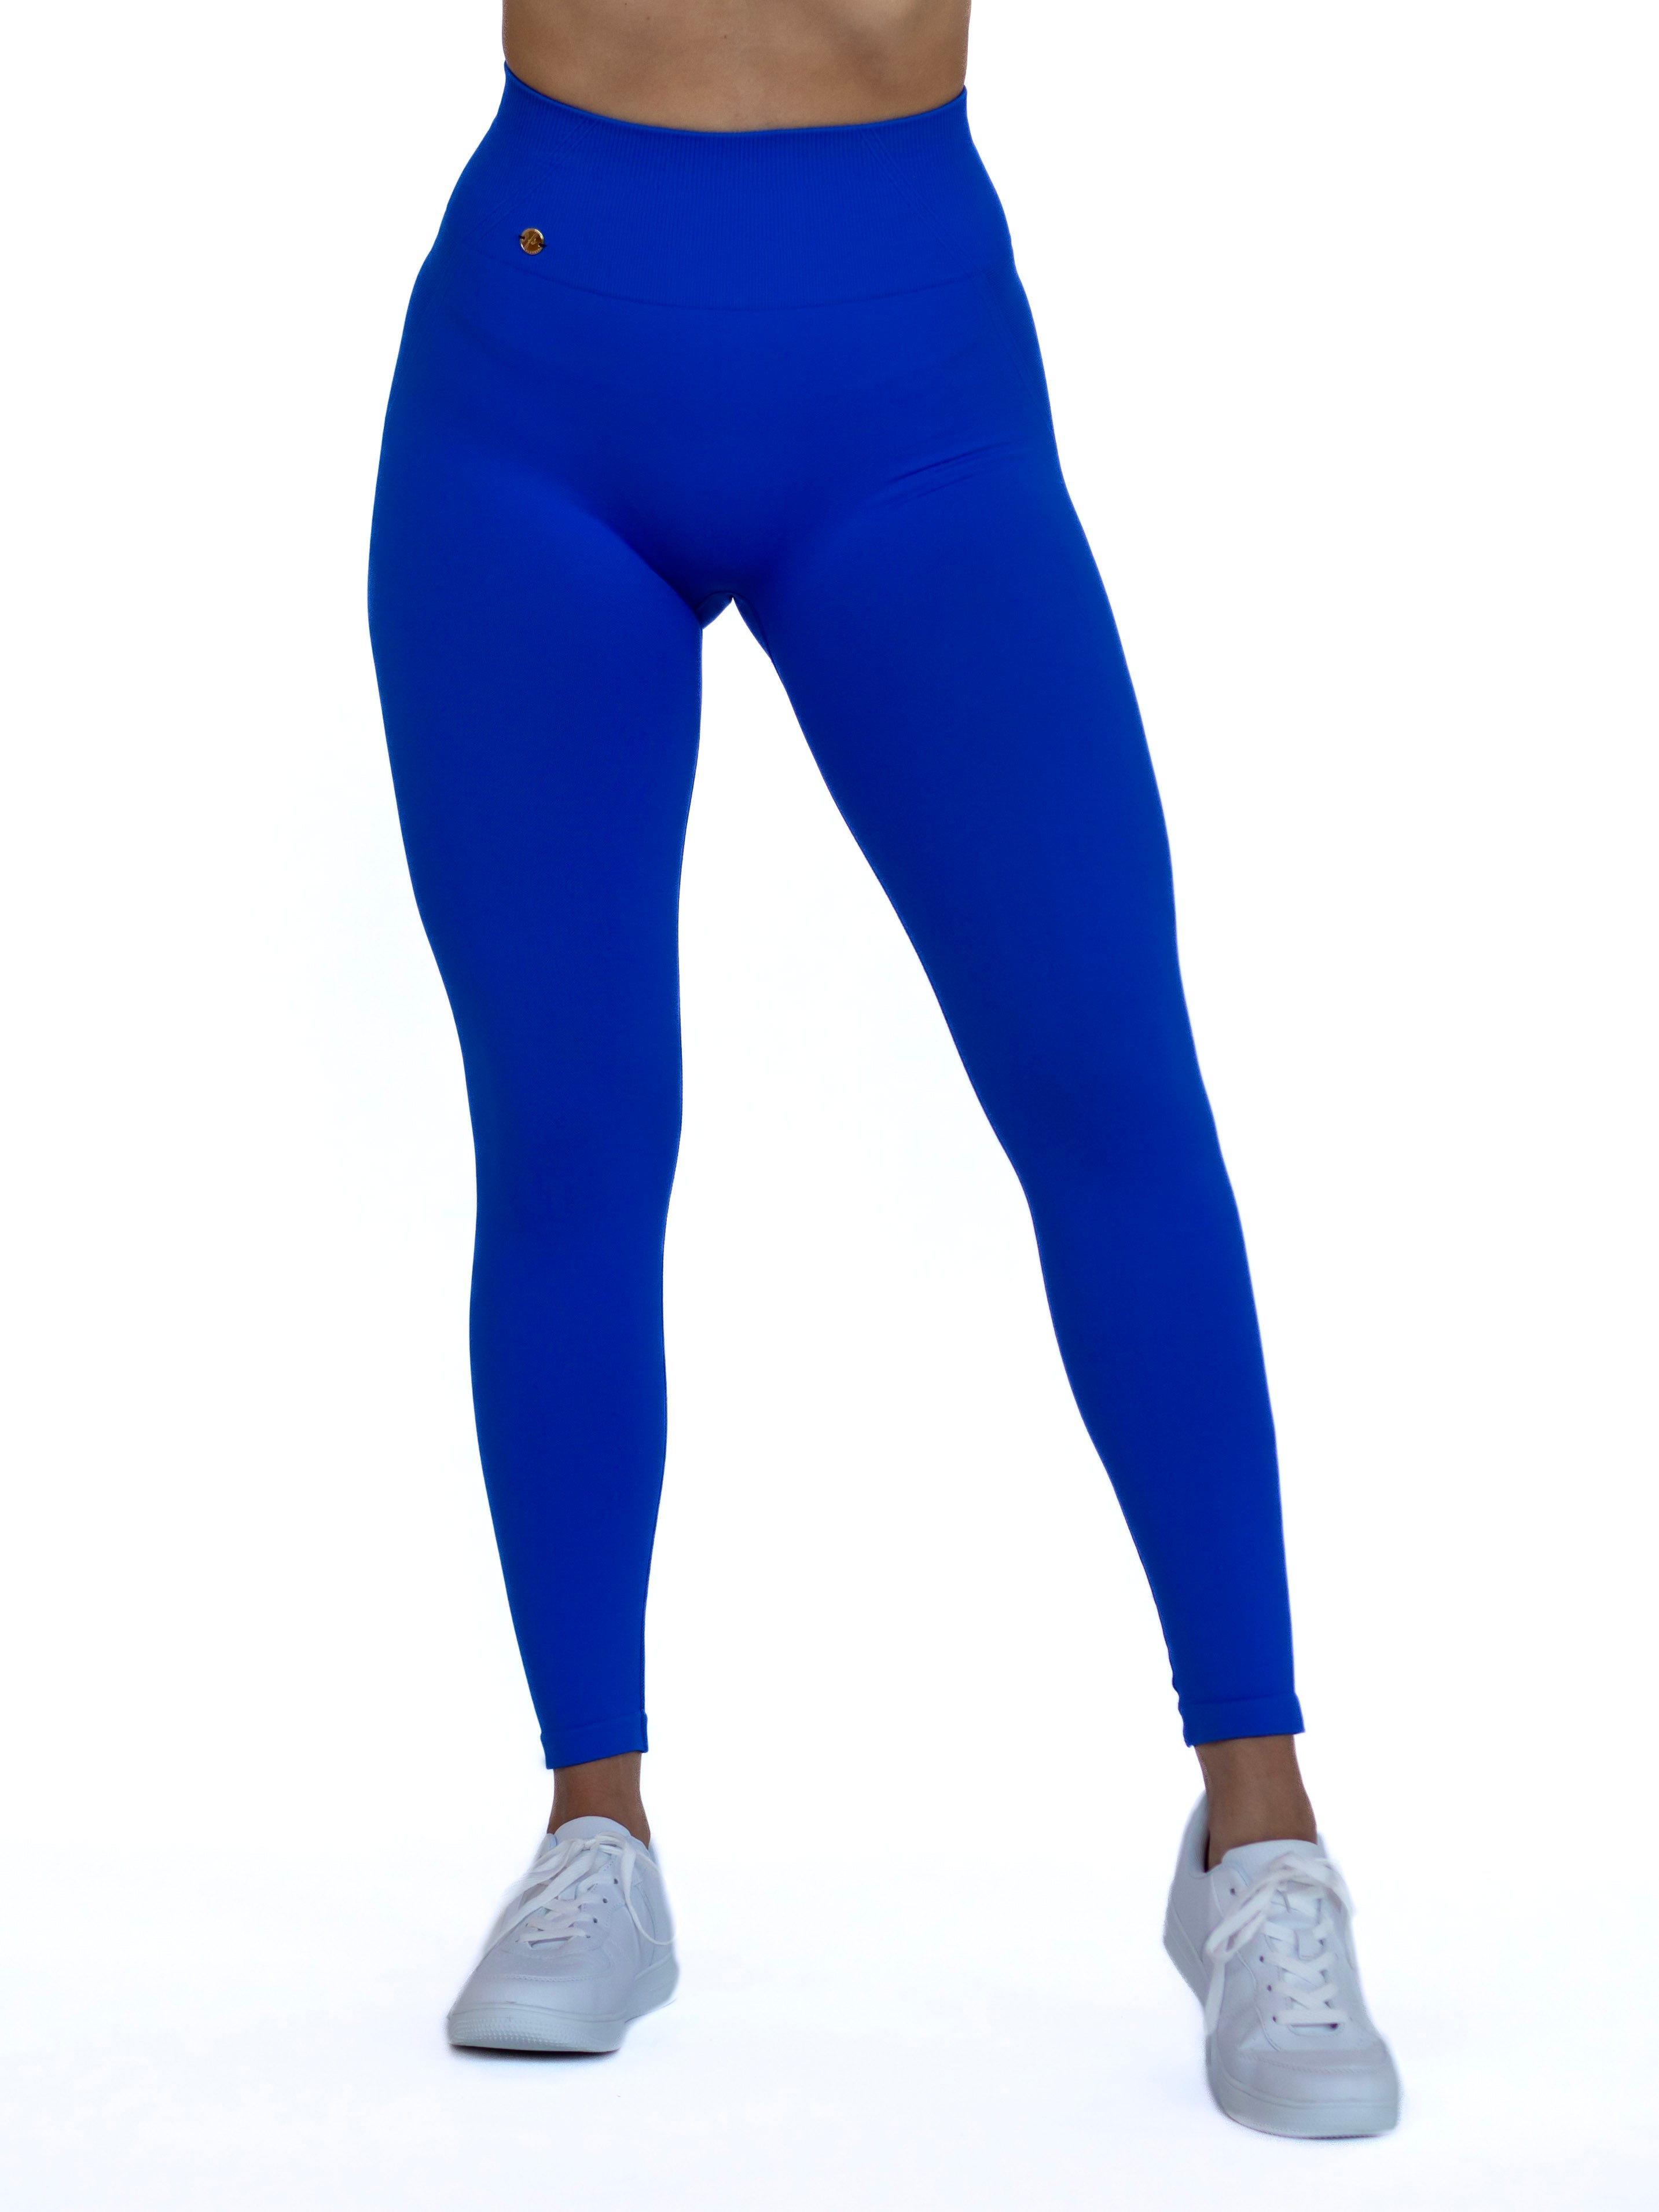 Motion Peachy Tights - Electric Blue